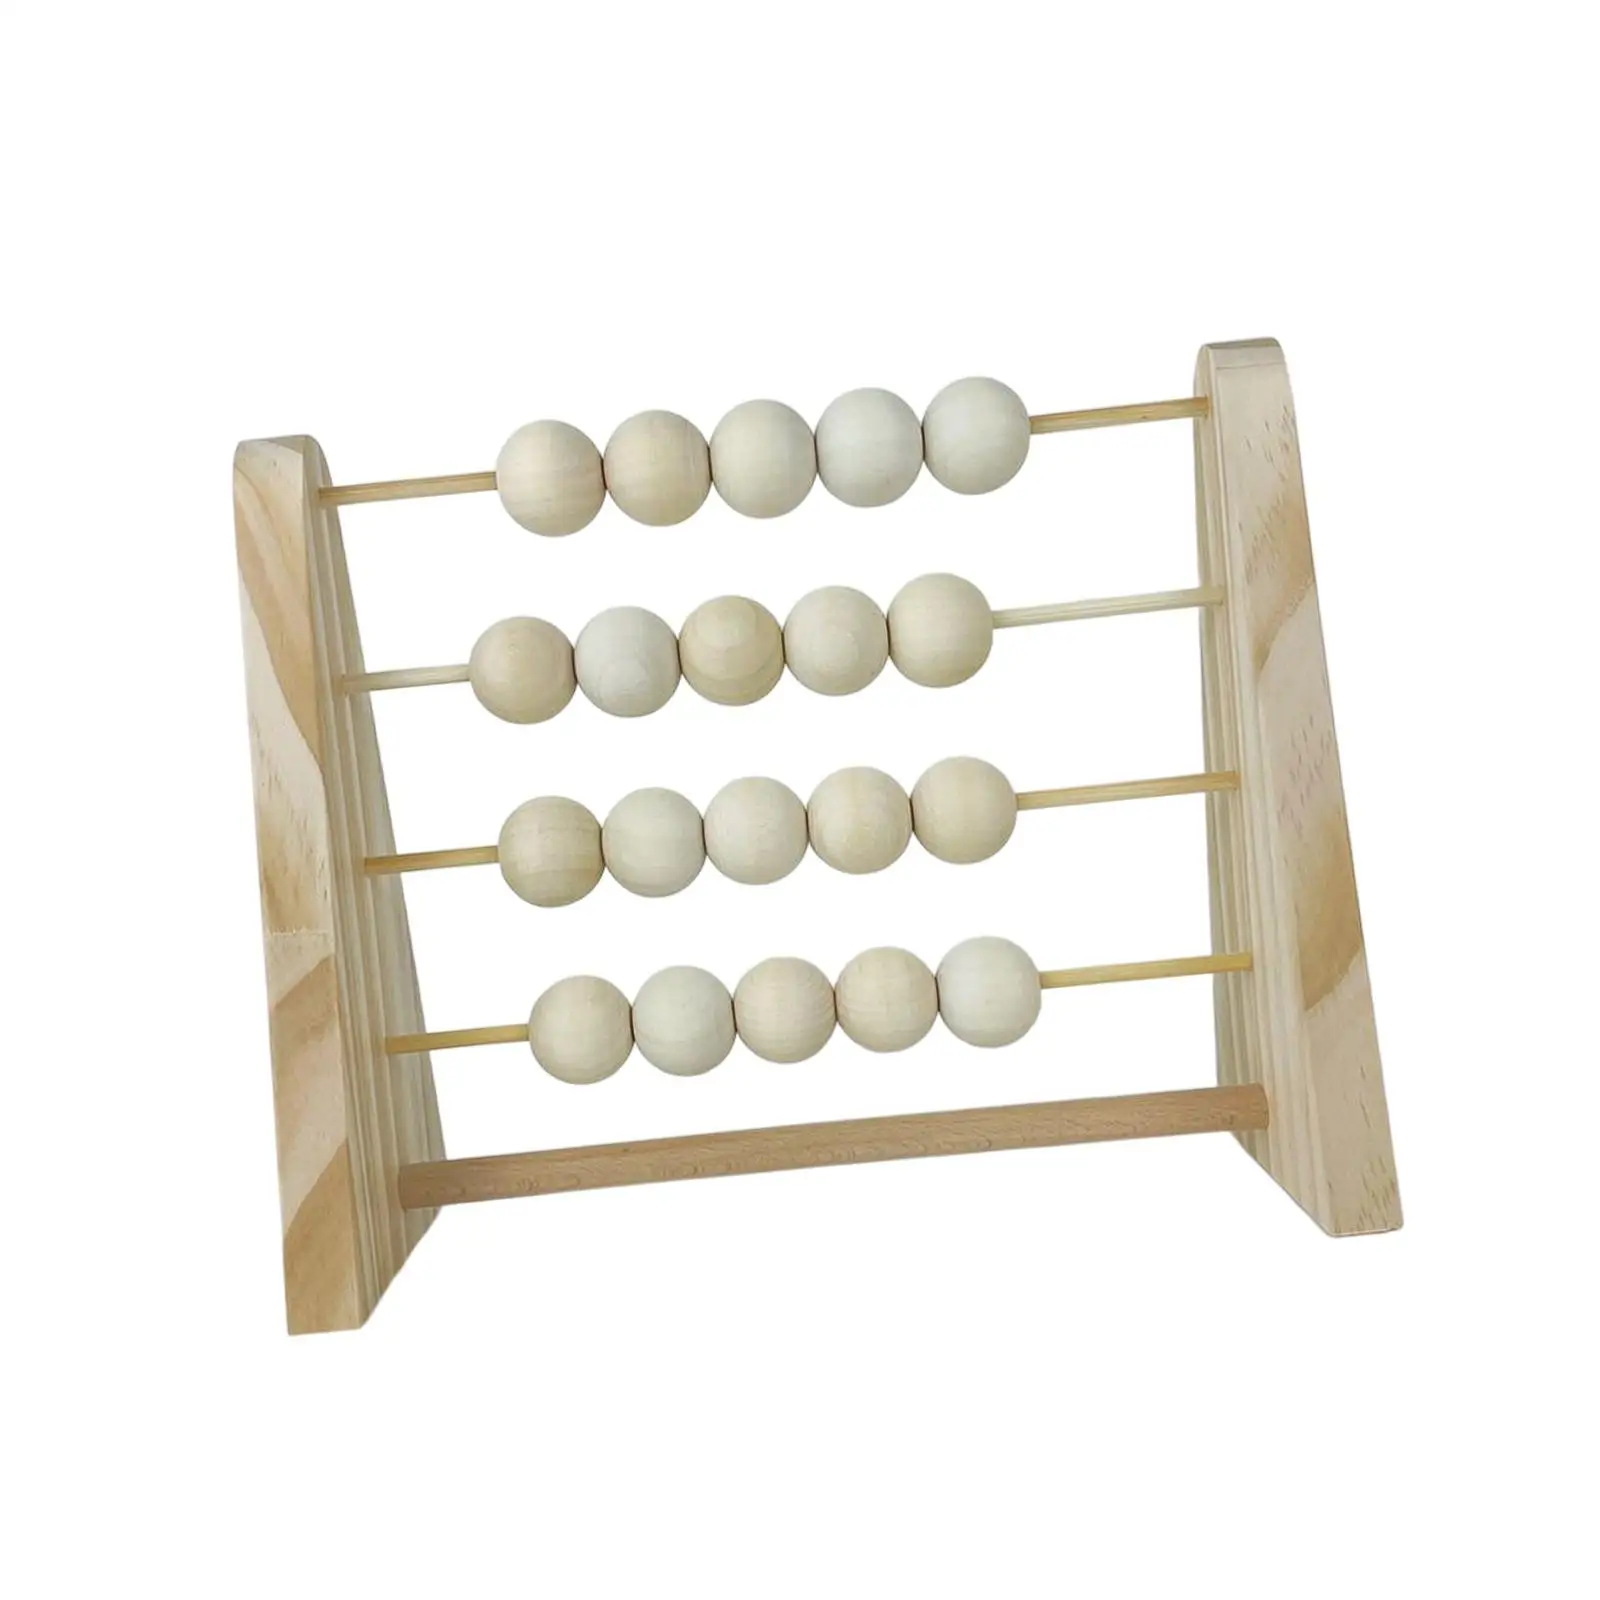 1Pc Montessori Wooden Abacus Counting Frame with Cards Early Educational Math Learning Addition and Subtraction Math Toys